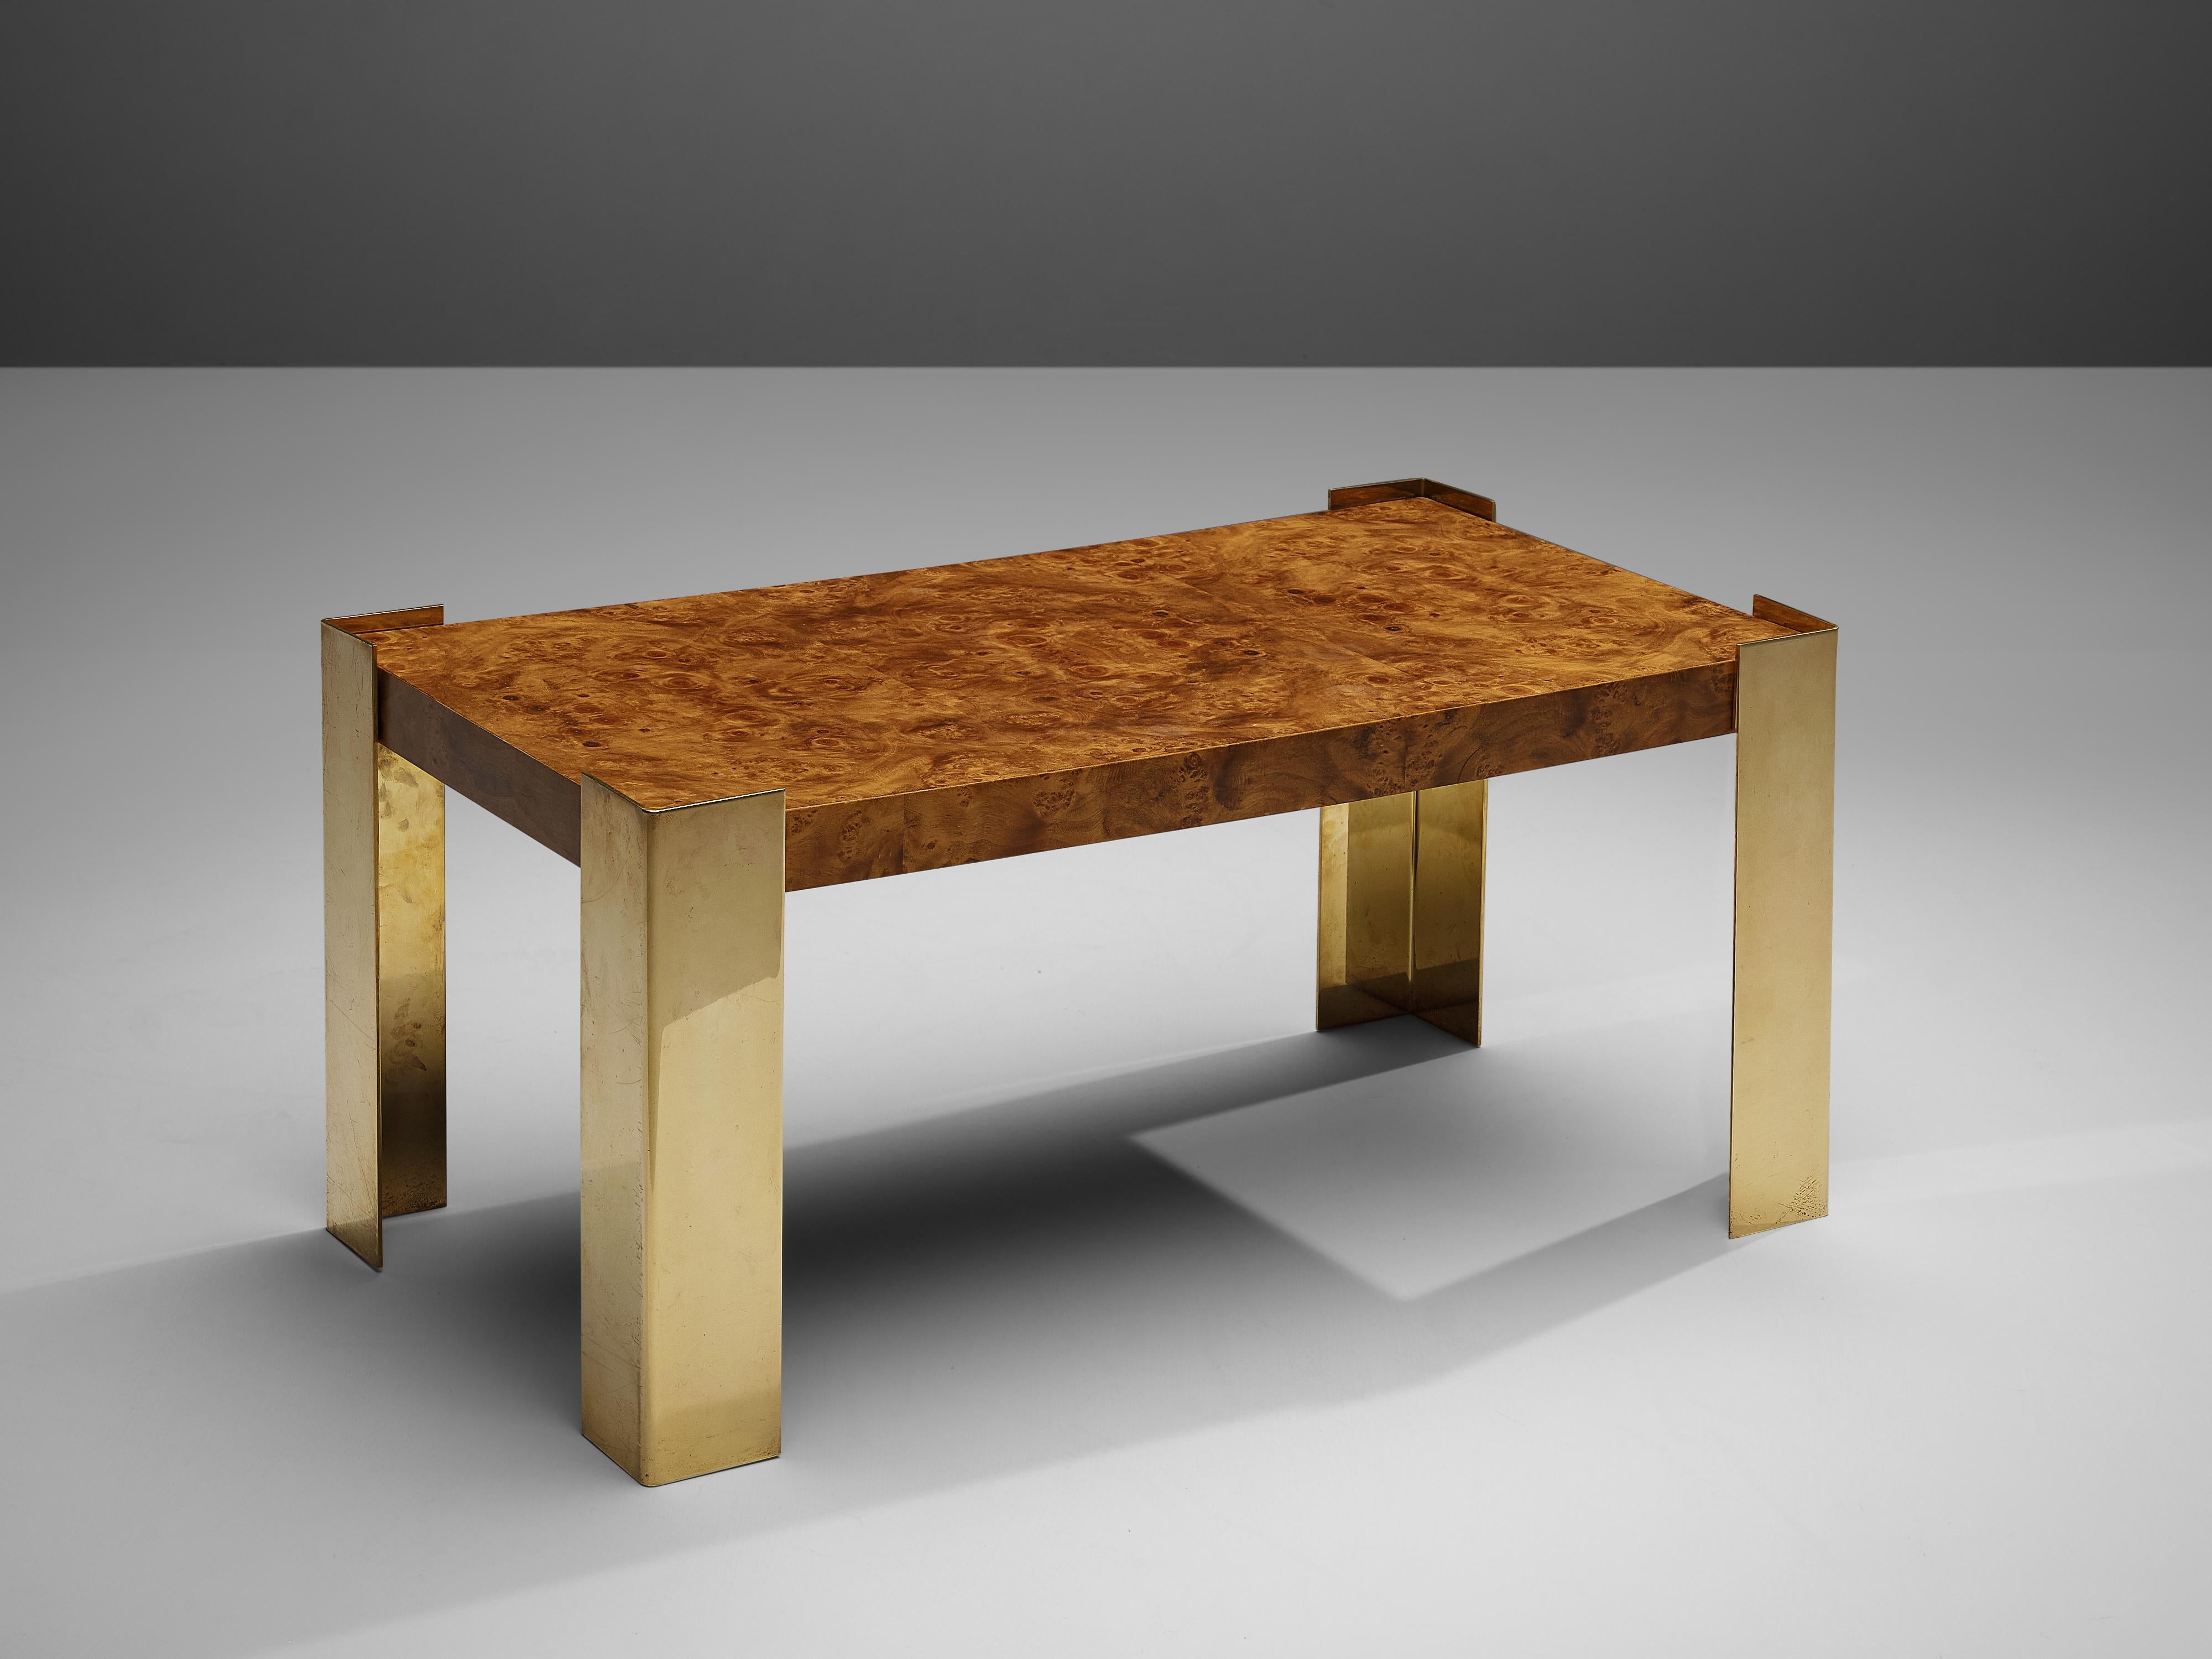 Coffee table, brass, walnut burl, Belgium, 1980s.

Belgian coffee table in glamorous look. Both the legs in brass and the vivid tabletop create an admirable design. The rectangular thick tabletop in walnut burl features a wonderful dynamic